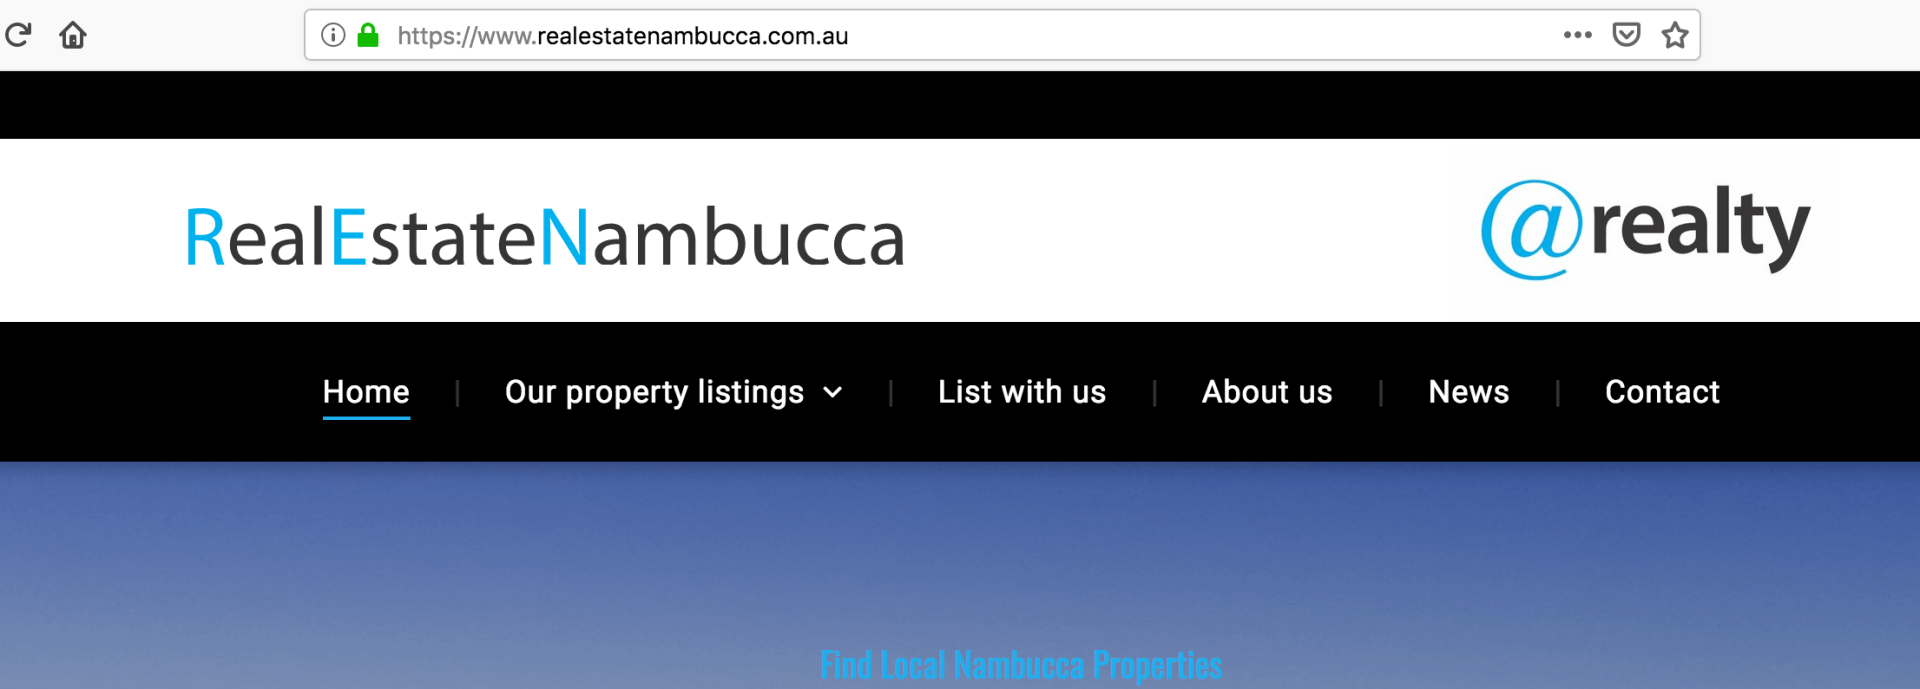 Real Estate Nambucca Co-branding with secure SSL image